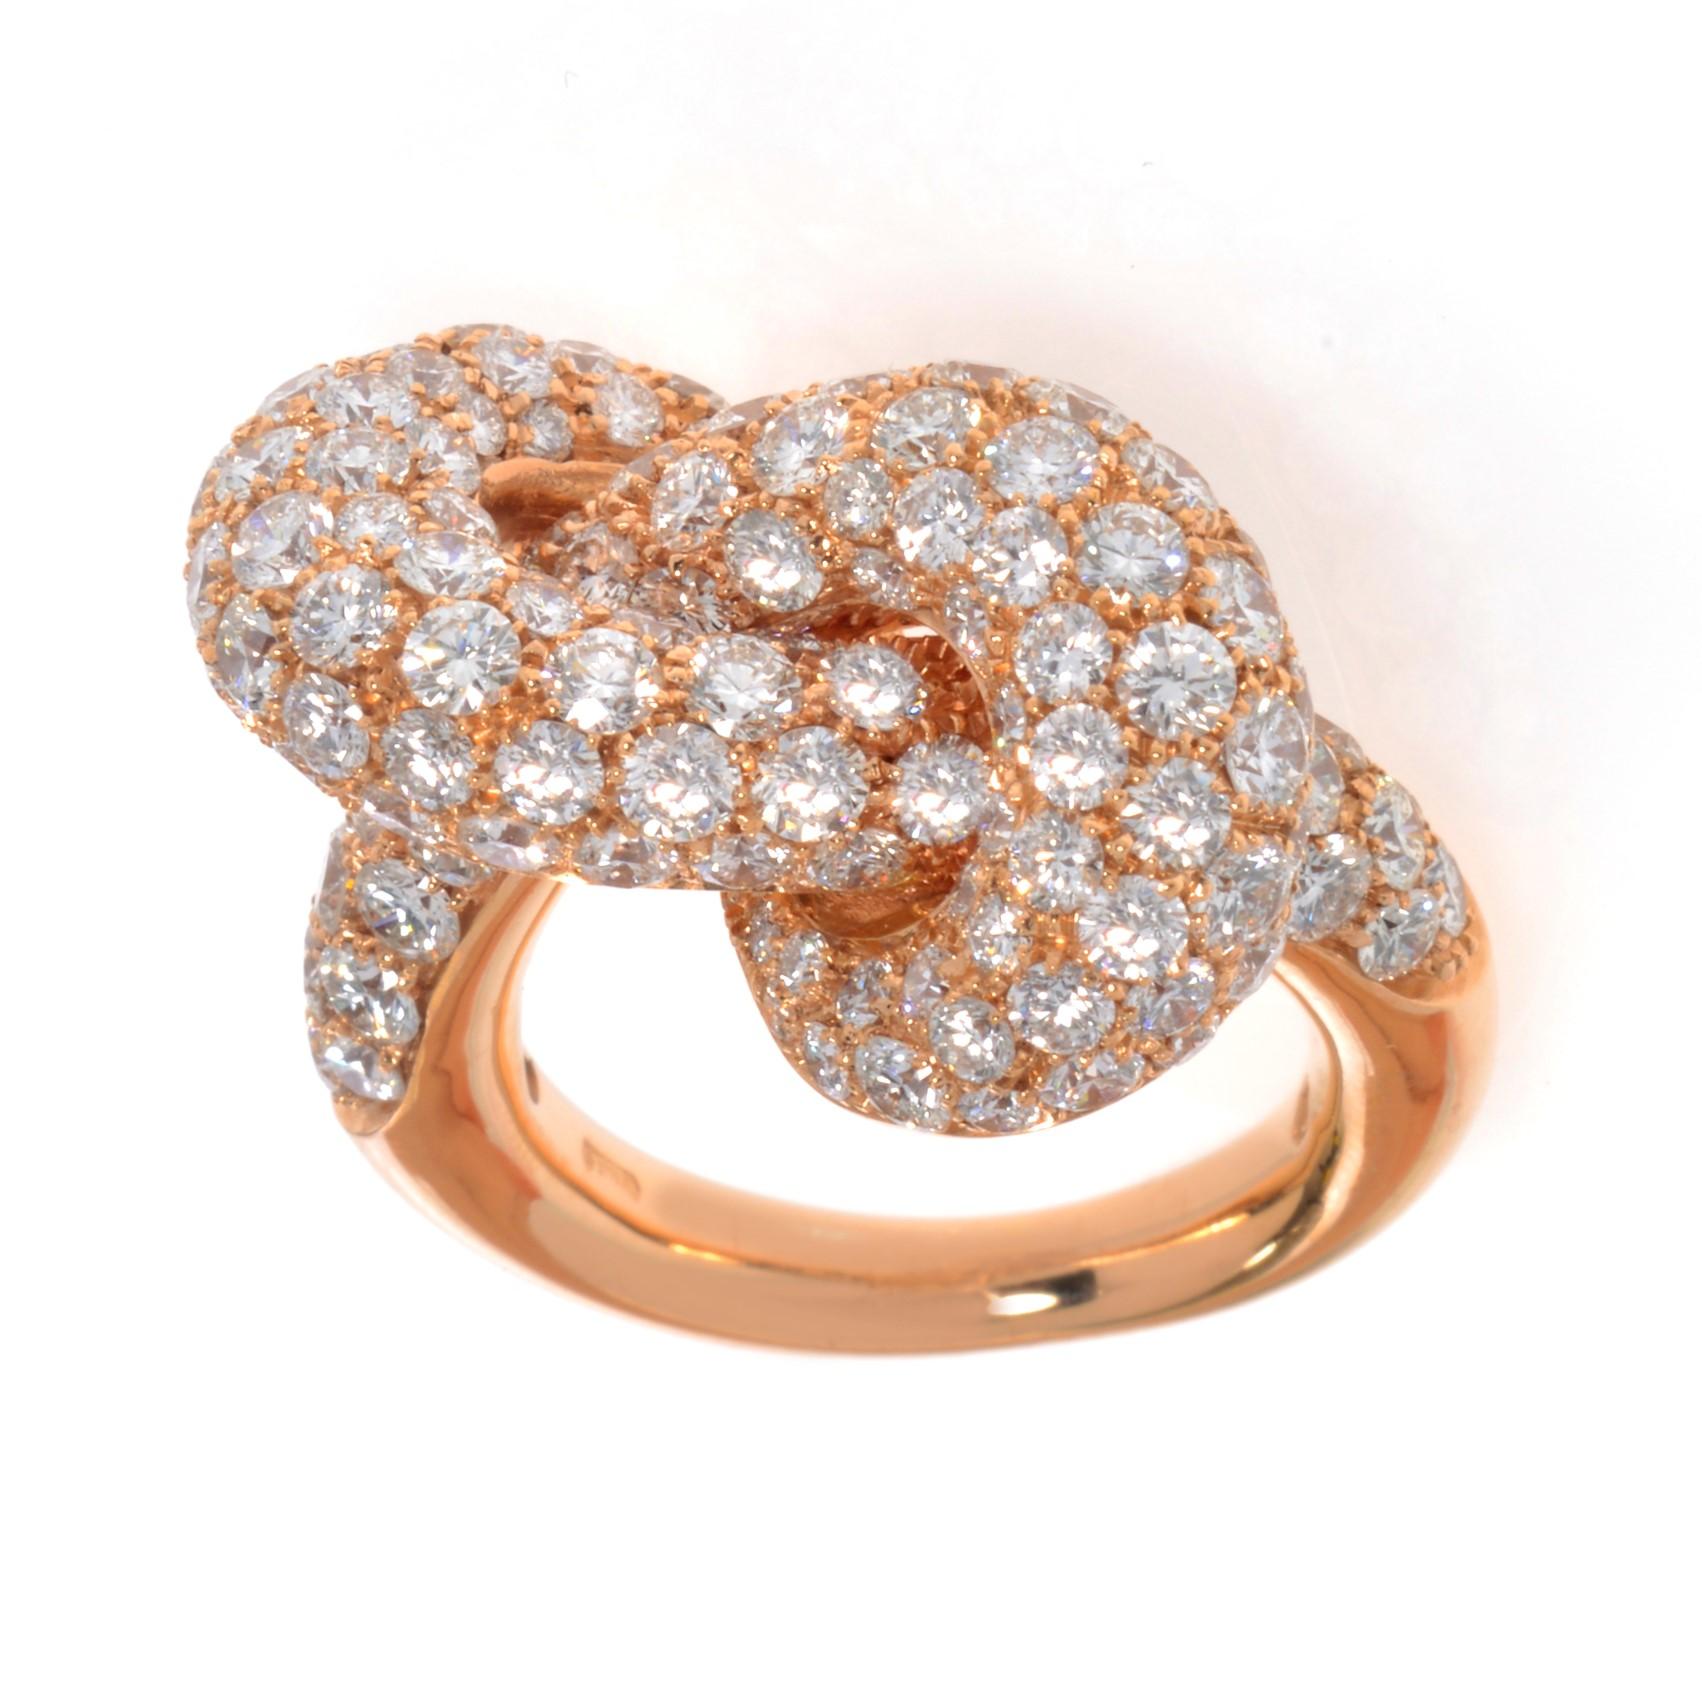 This chic jewelry piece is crafted in 18k rose gold with high polished smooth finish illuminating tons of shine and brilliance. Perfectly designed interlacing lines are creating a fabulous knot design adorned with 5.05cttw of genuine round cut